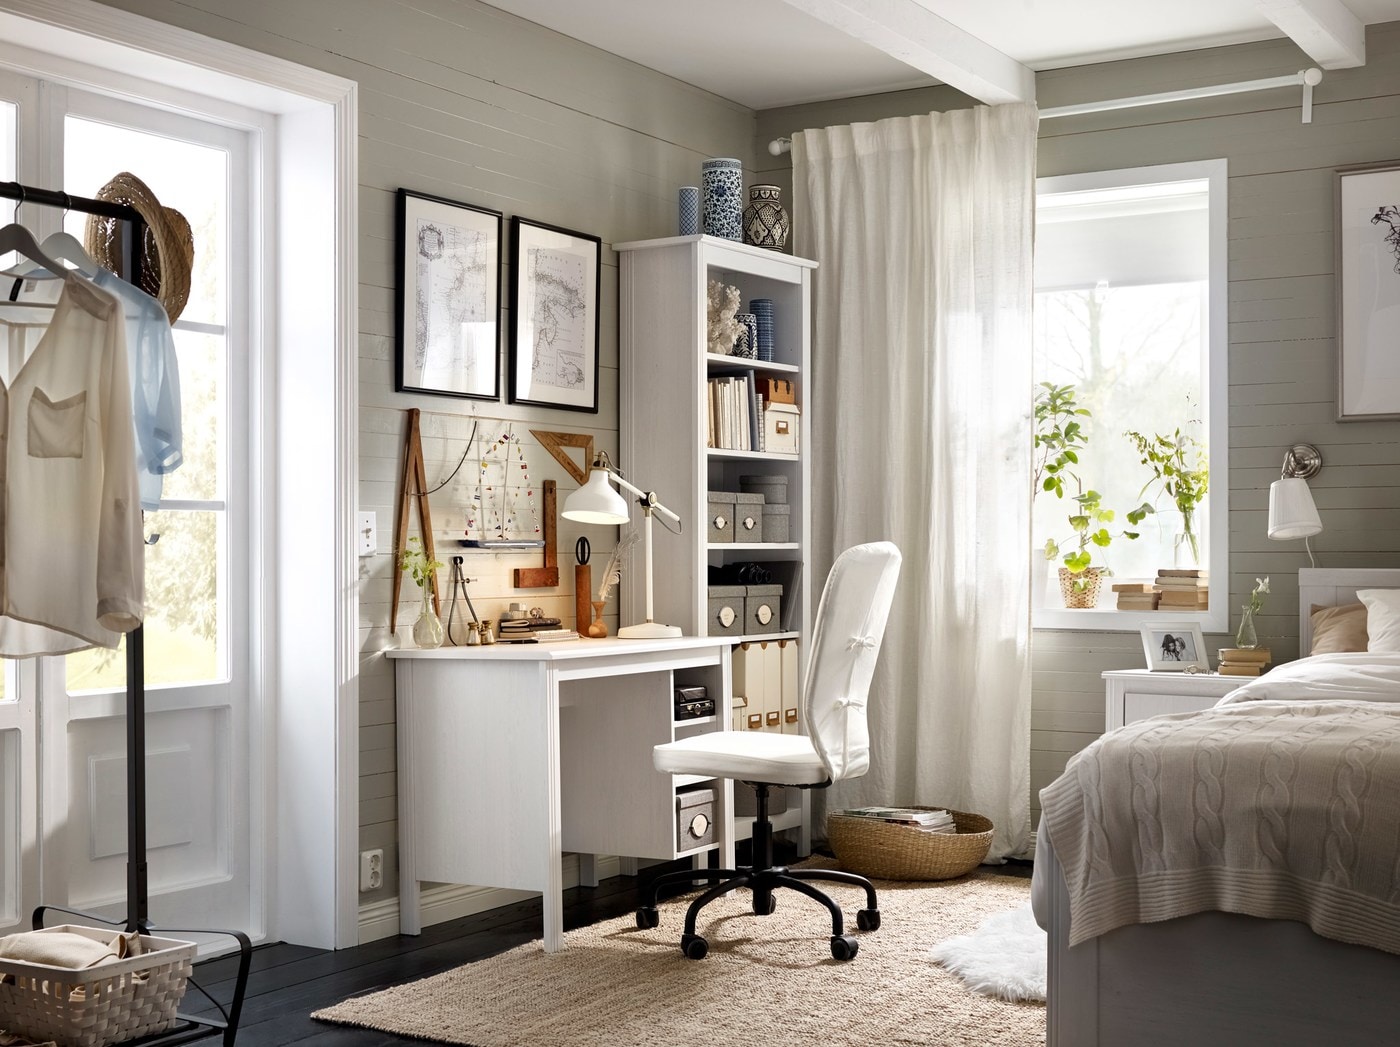 From Workspace To Sleep Space: Curtains In Home Office And Bedroom Design